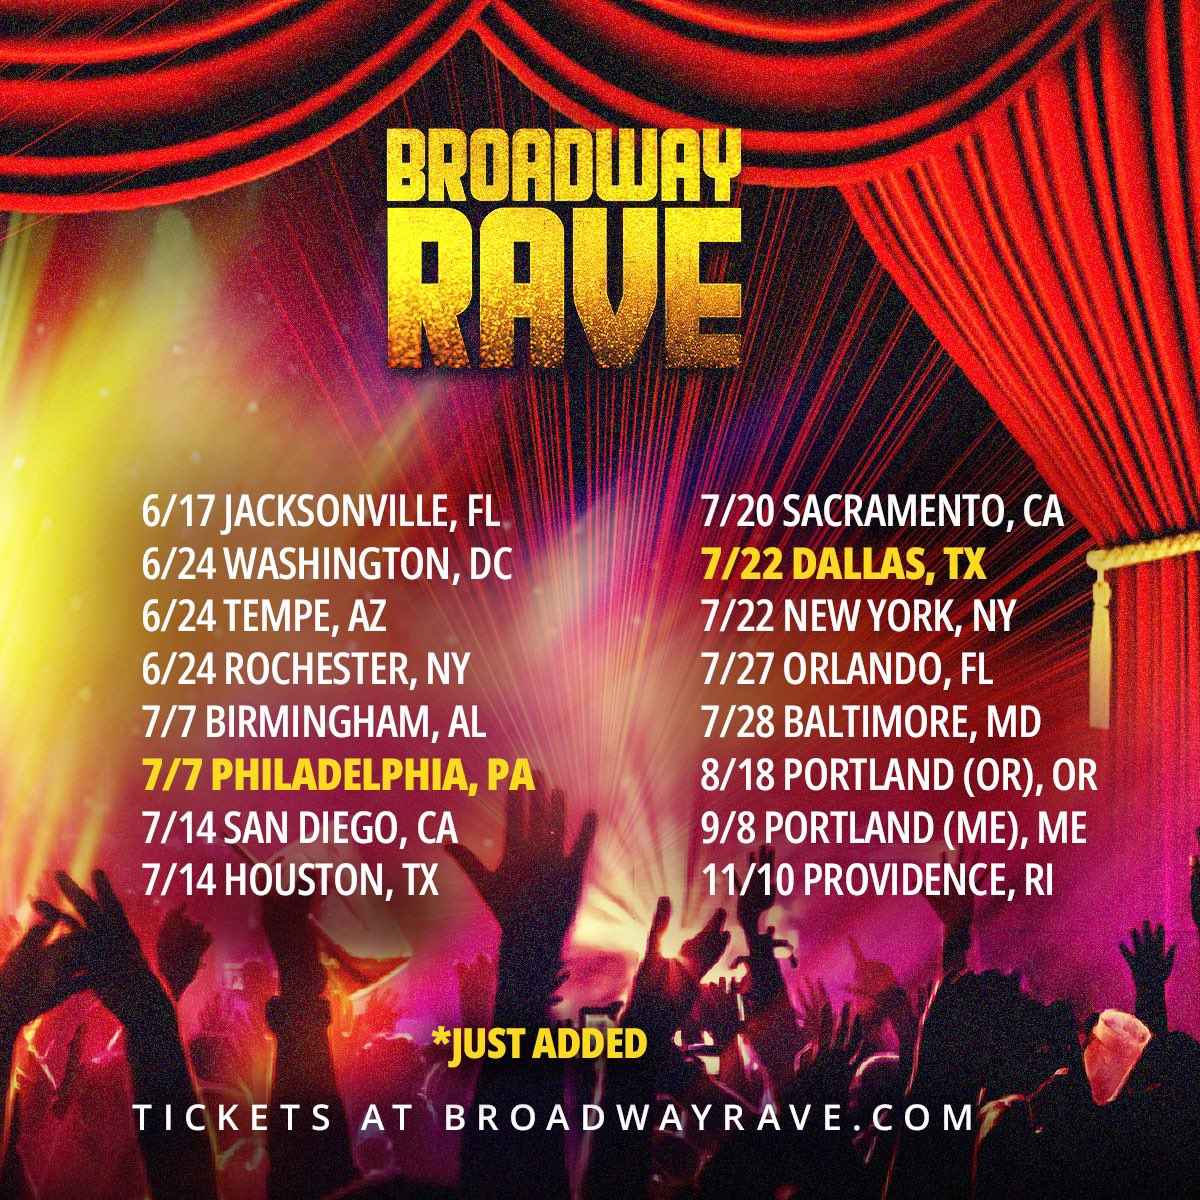 Who’s ready to BROADWAY RAVE!? Tickets: broadwayrave.com/raves